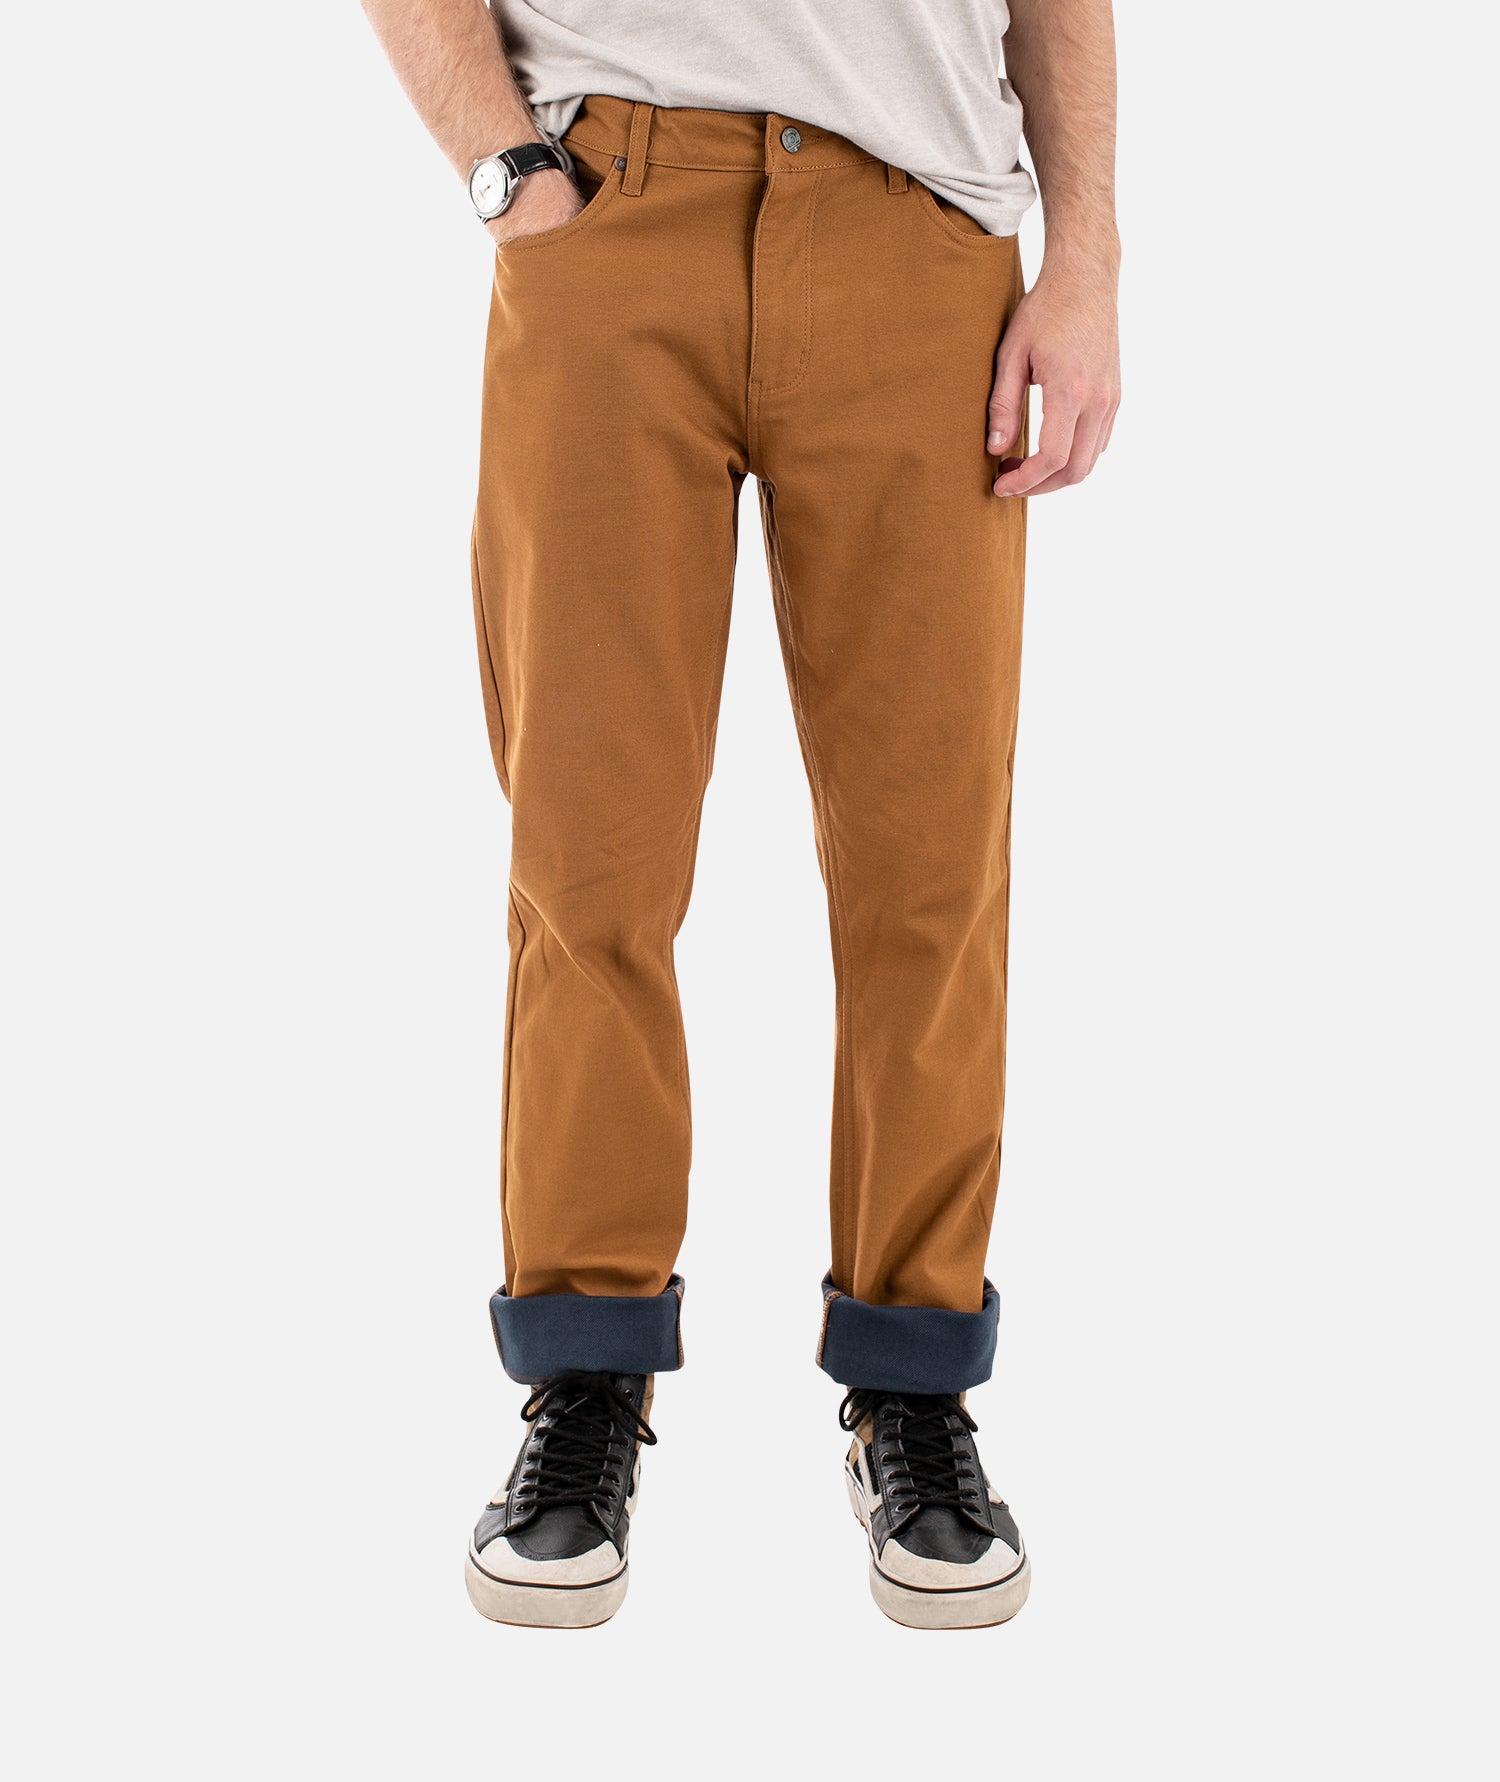 Mariner Lined Pants - Camel – Jetty